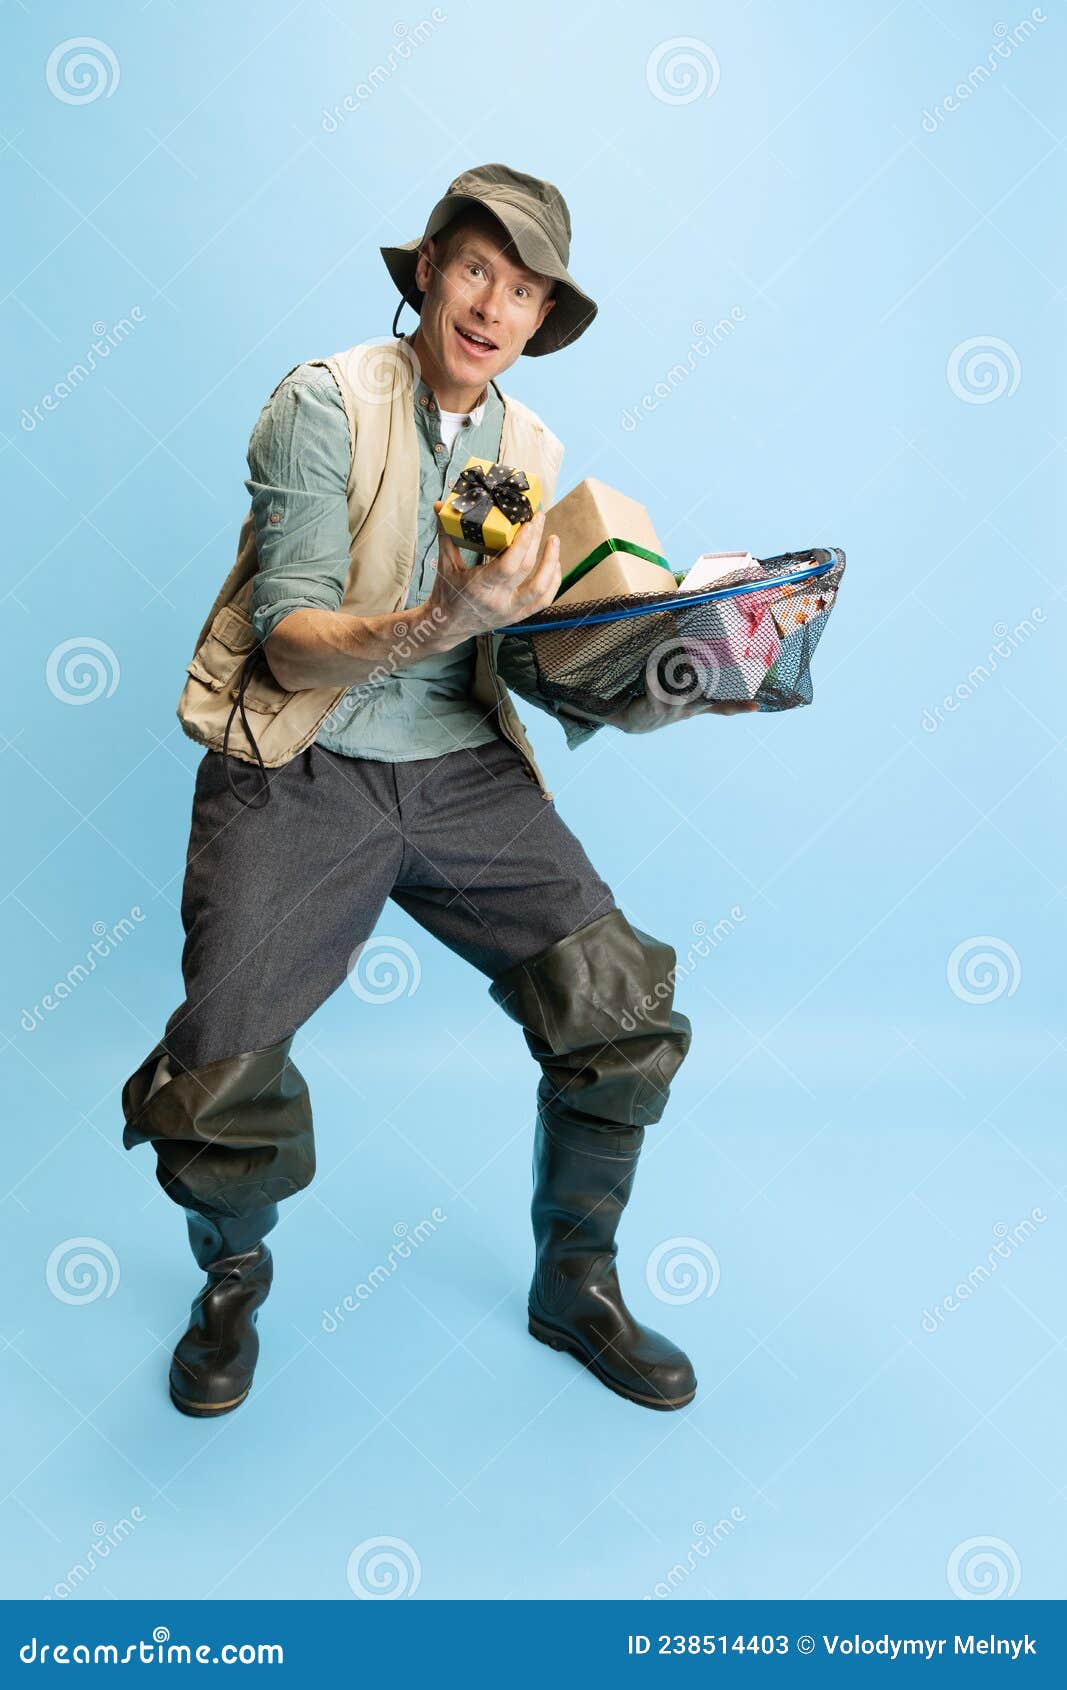 Funny Young Man, Fisherman with Fishing Accessories Wearing Sport